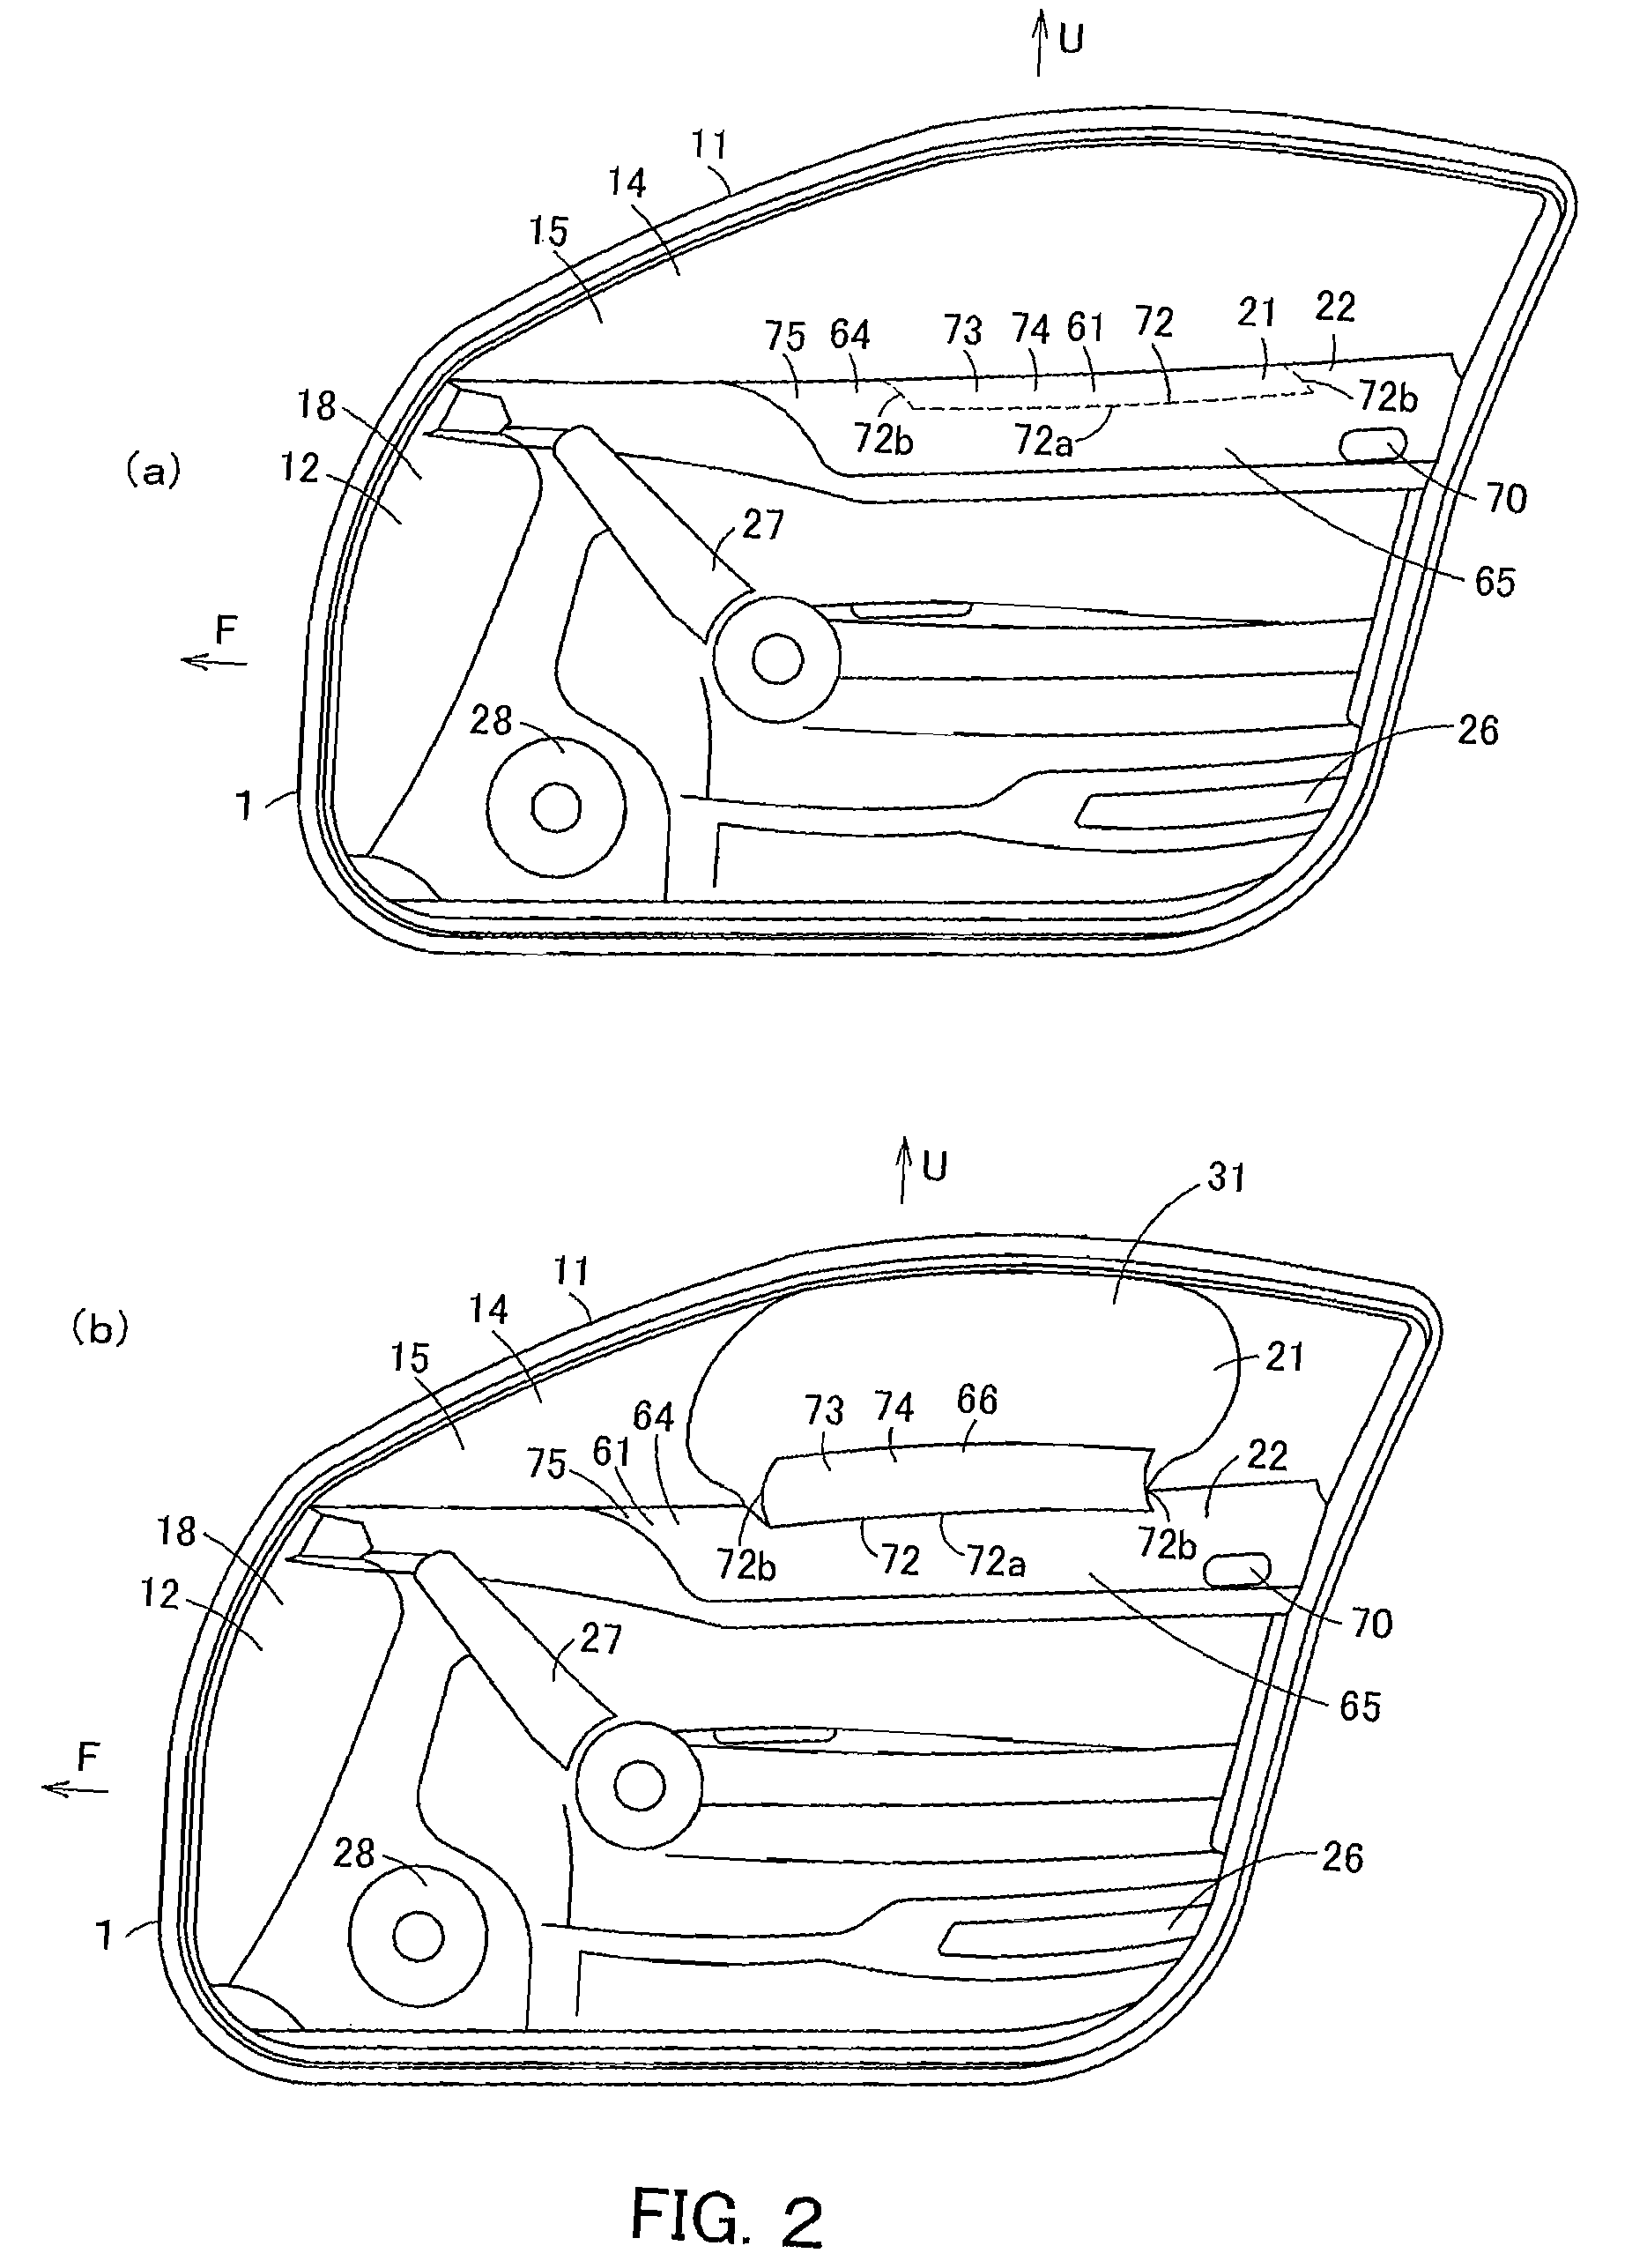 Airbag cover body and airbag apparatus